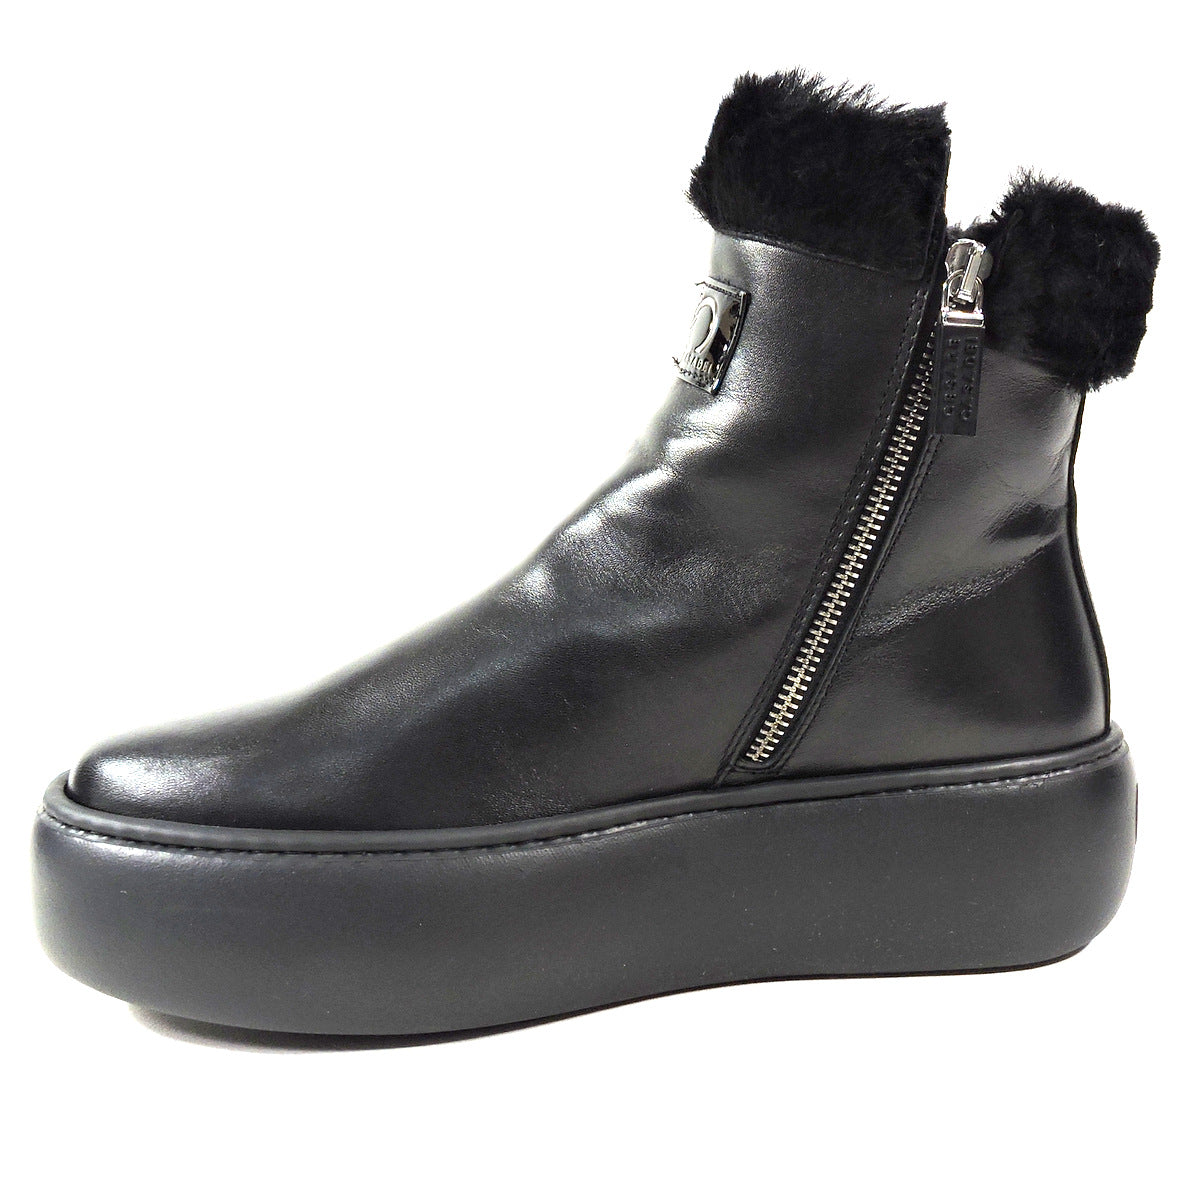 CASADEI 🇮🇹 WOMEN'S BLACK SOFT LEATHER WINTER ANKLE BOOTIE